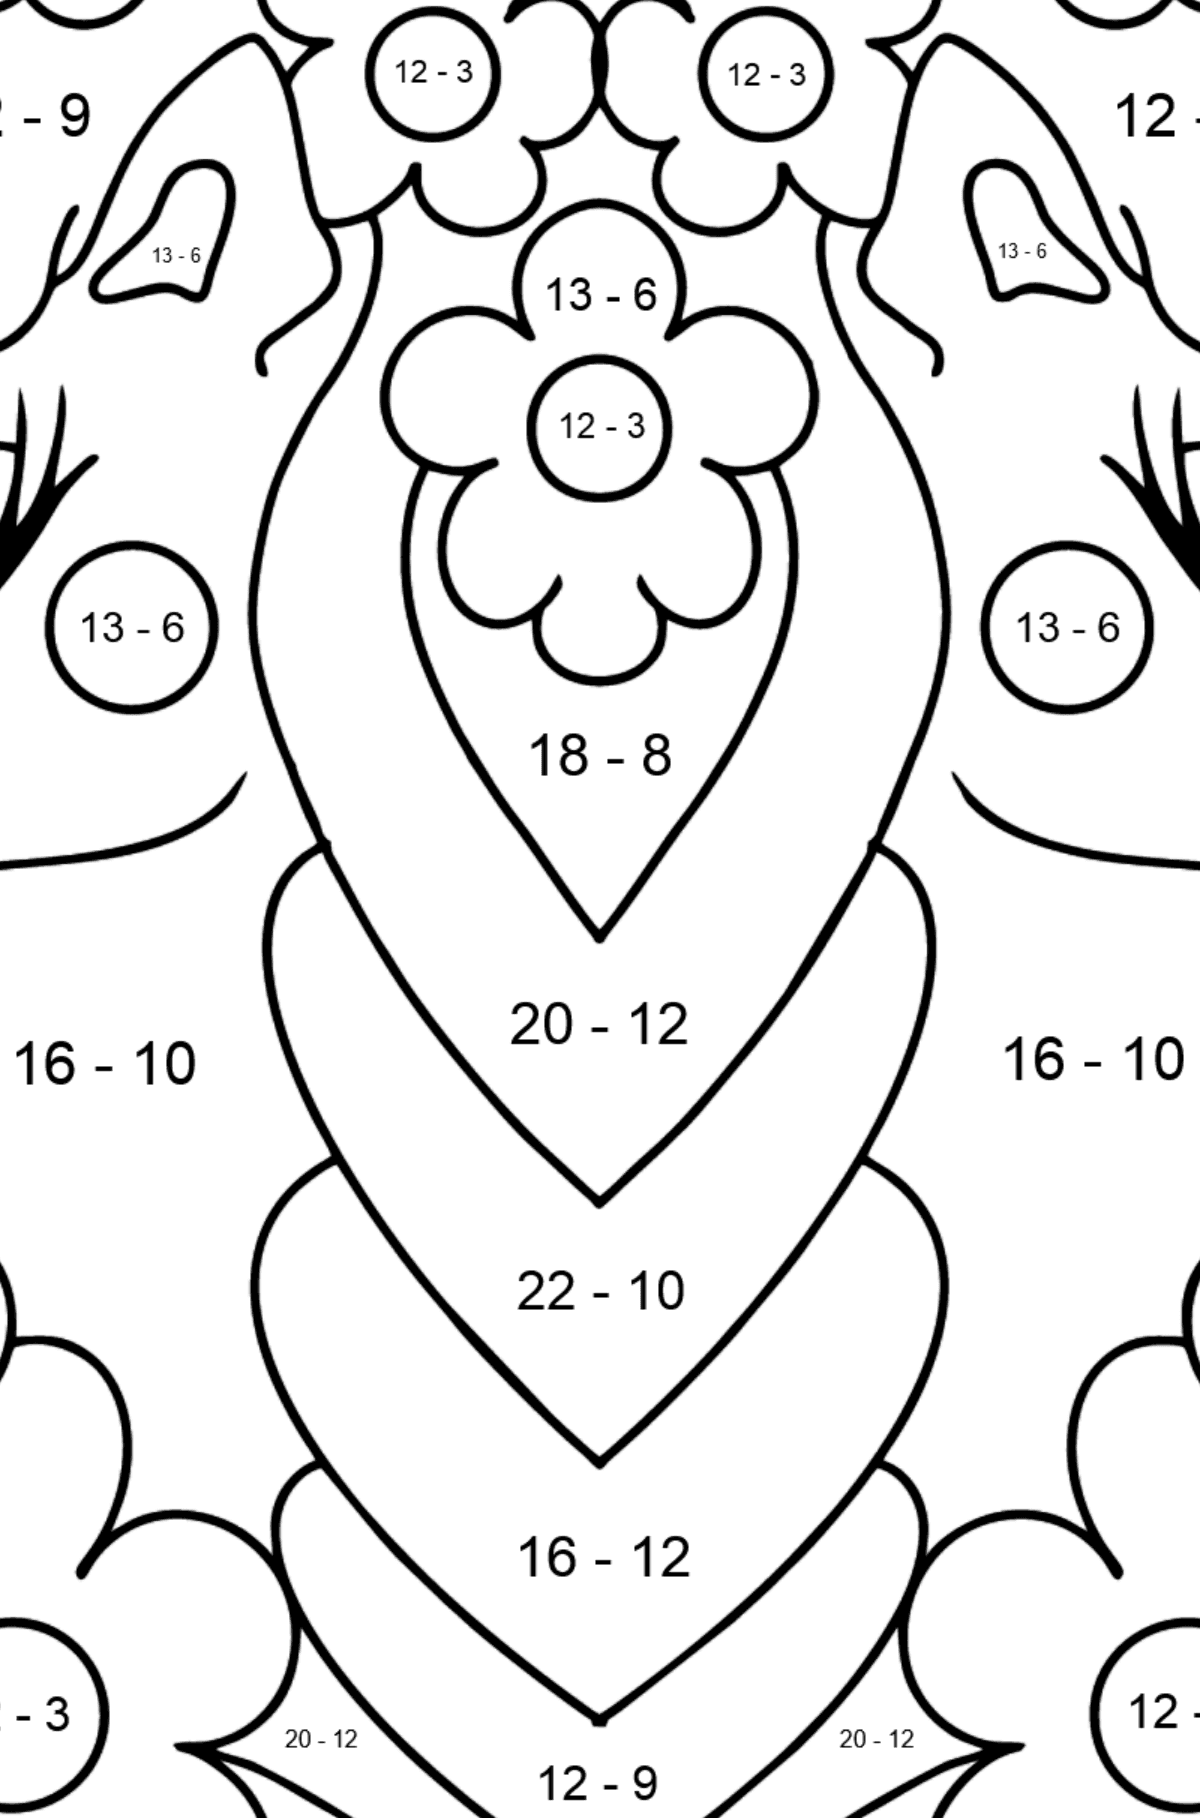 Difficult Unicorn Coloring Book - Math Coloring - Subtraction for Kids